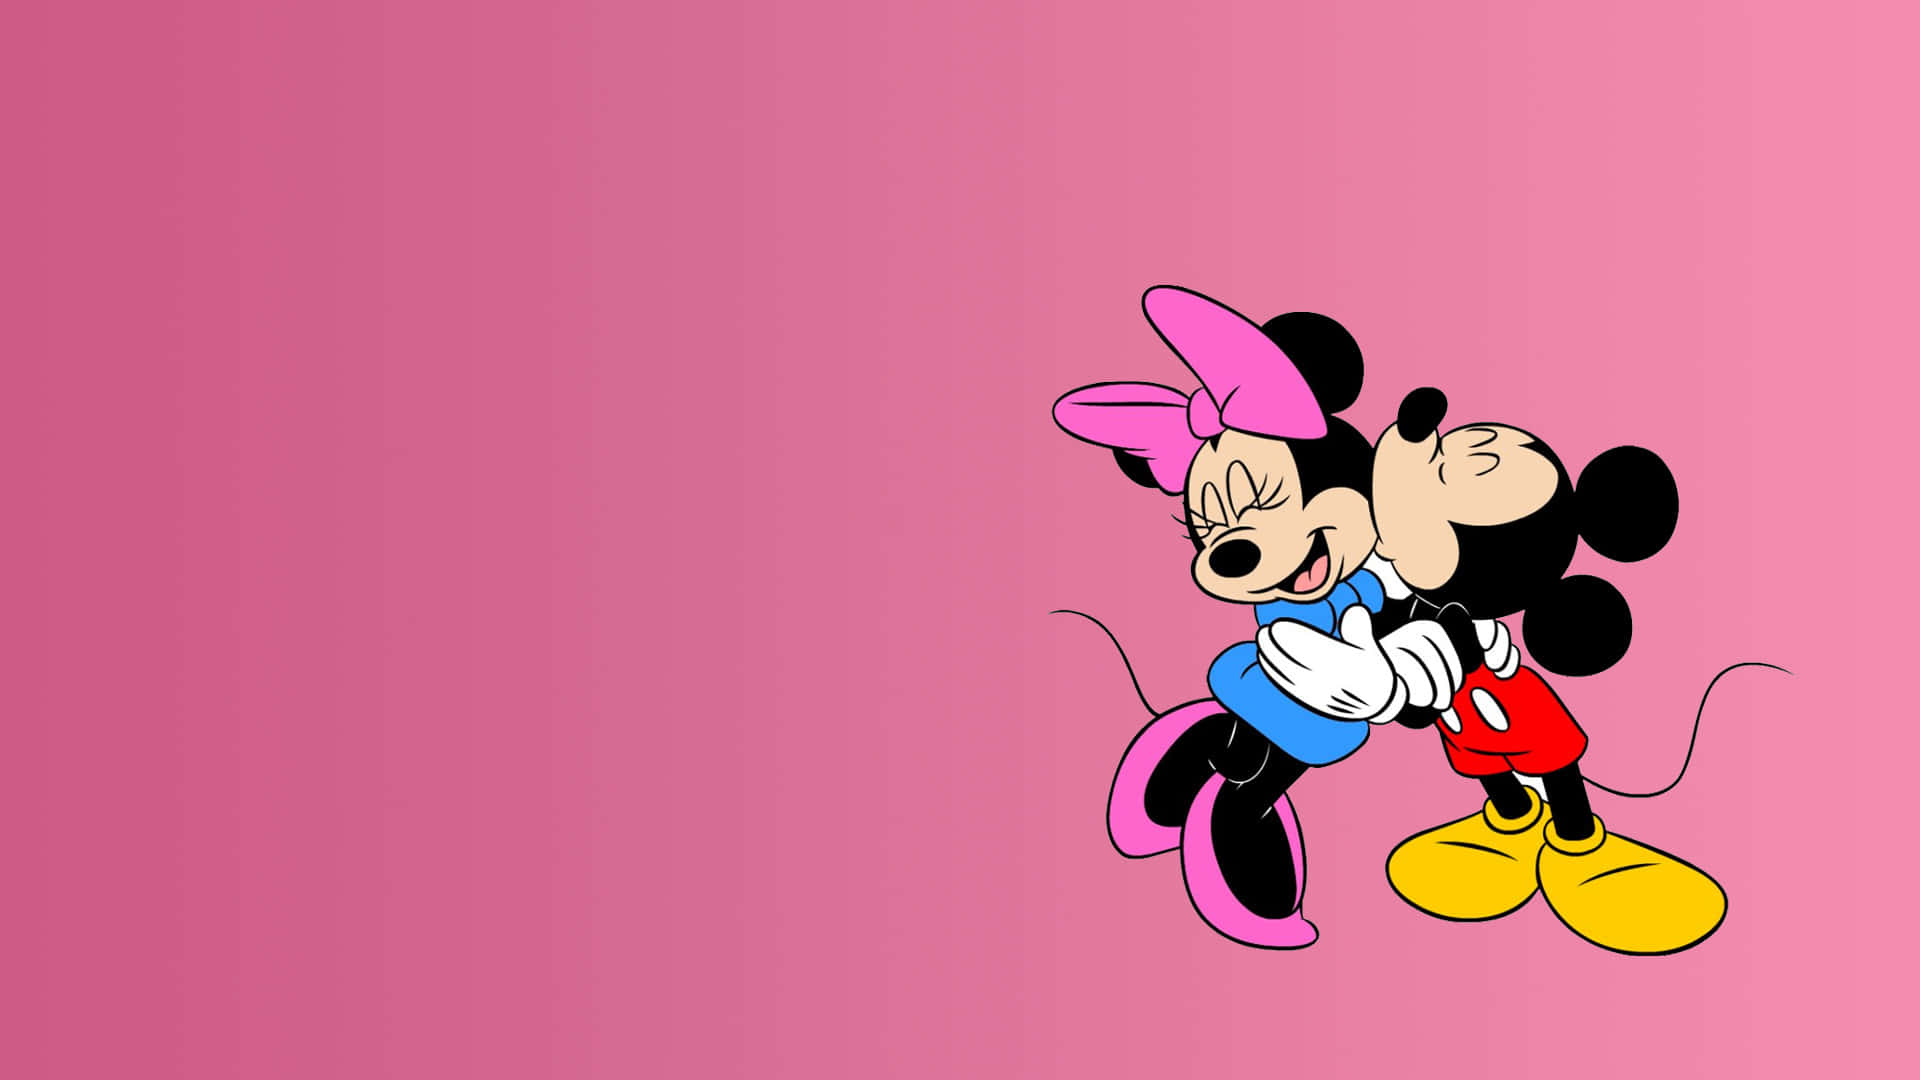 Minnie Mouse looking ever so cute in her trademark pink outfit! Wallpaper